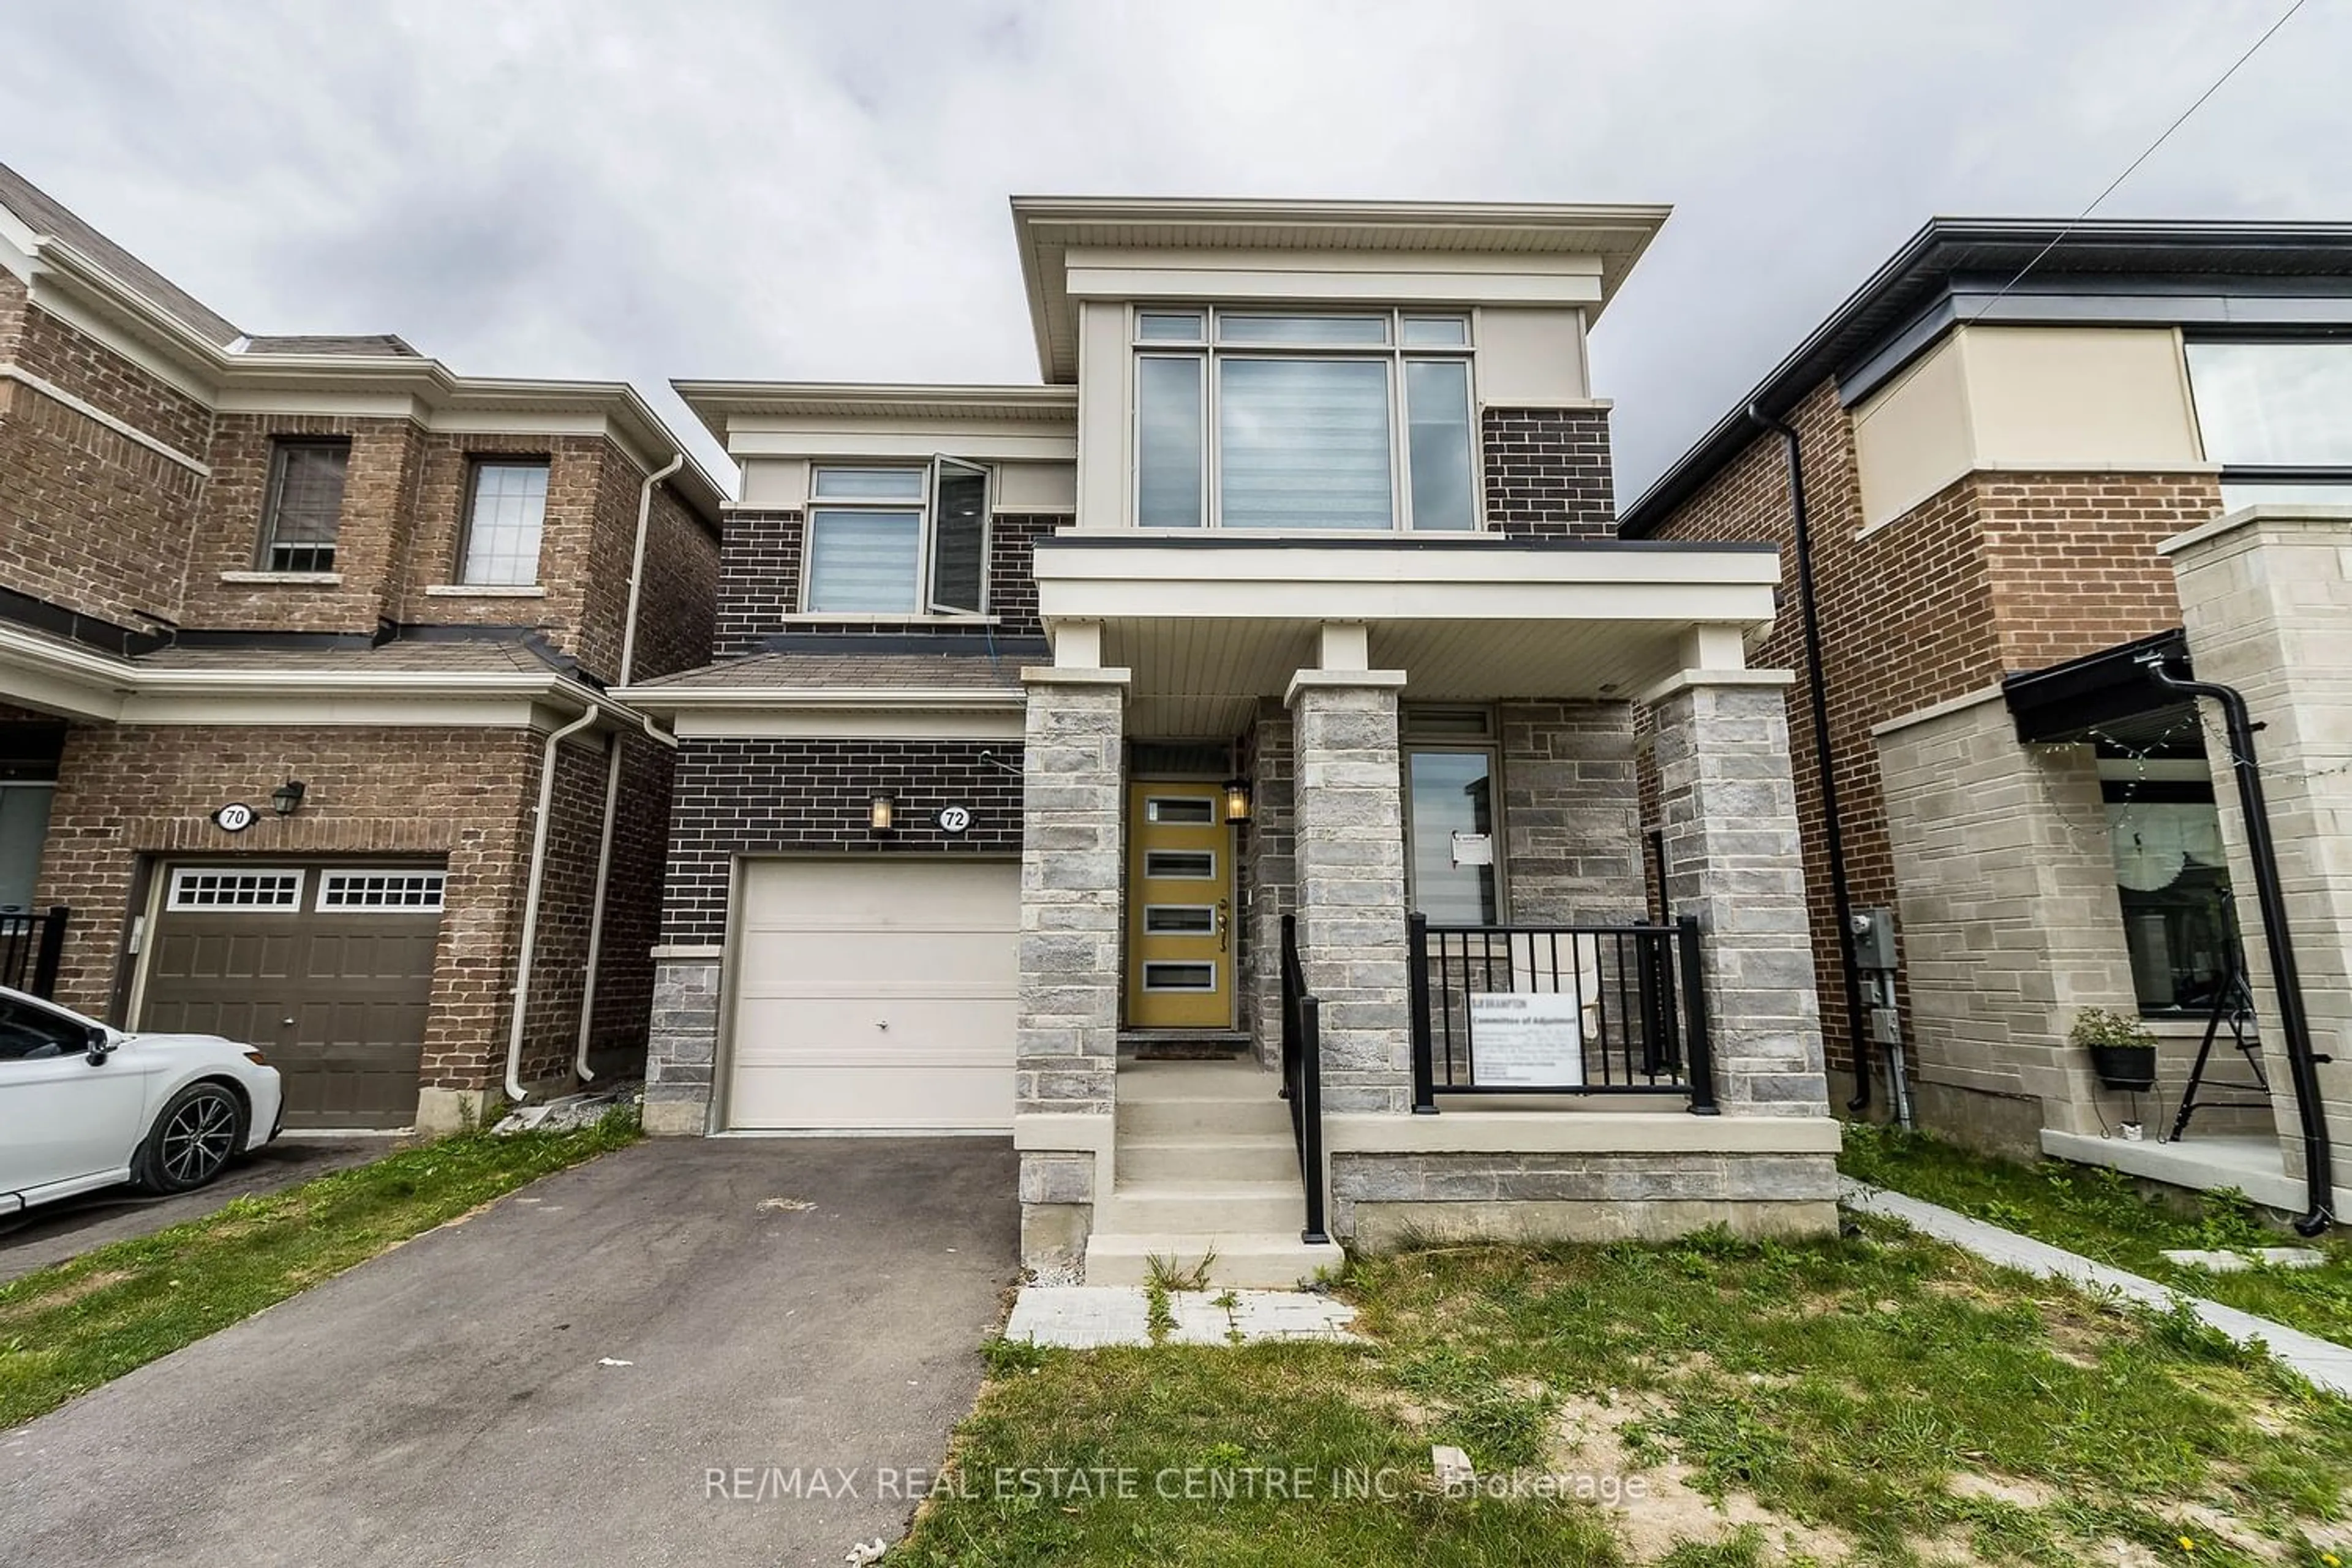 Frontside or backside of a home for 72 Circus Cres, Brampton Ontario L7A 5E1